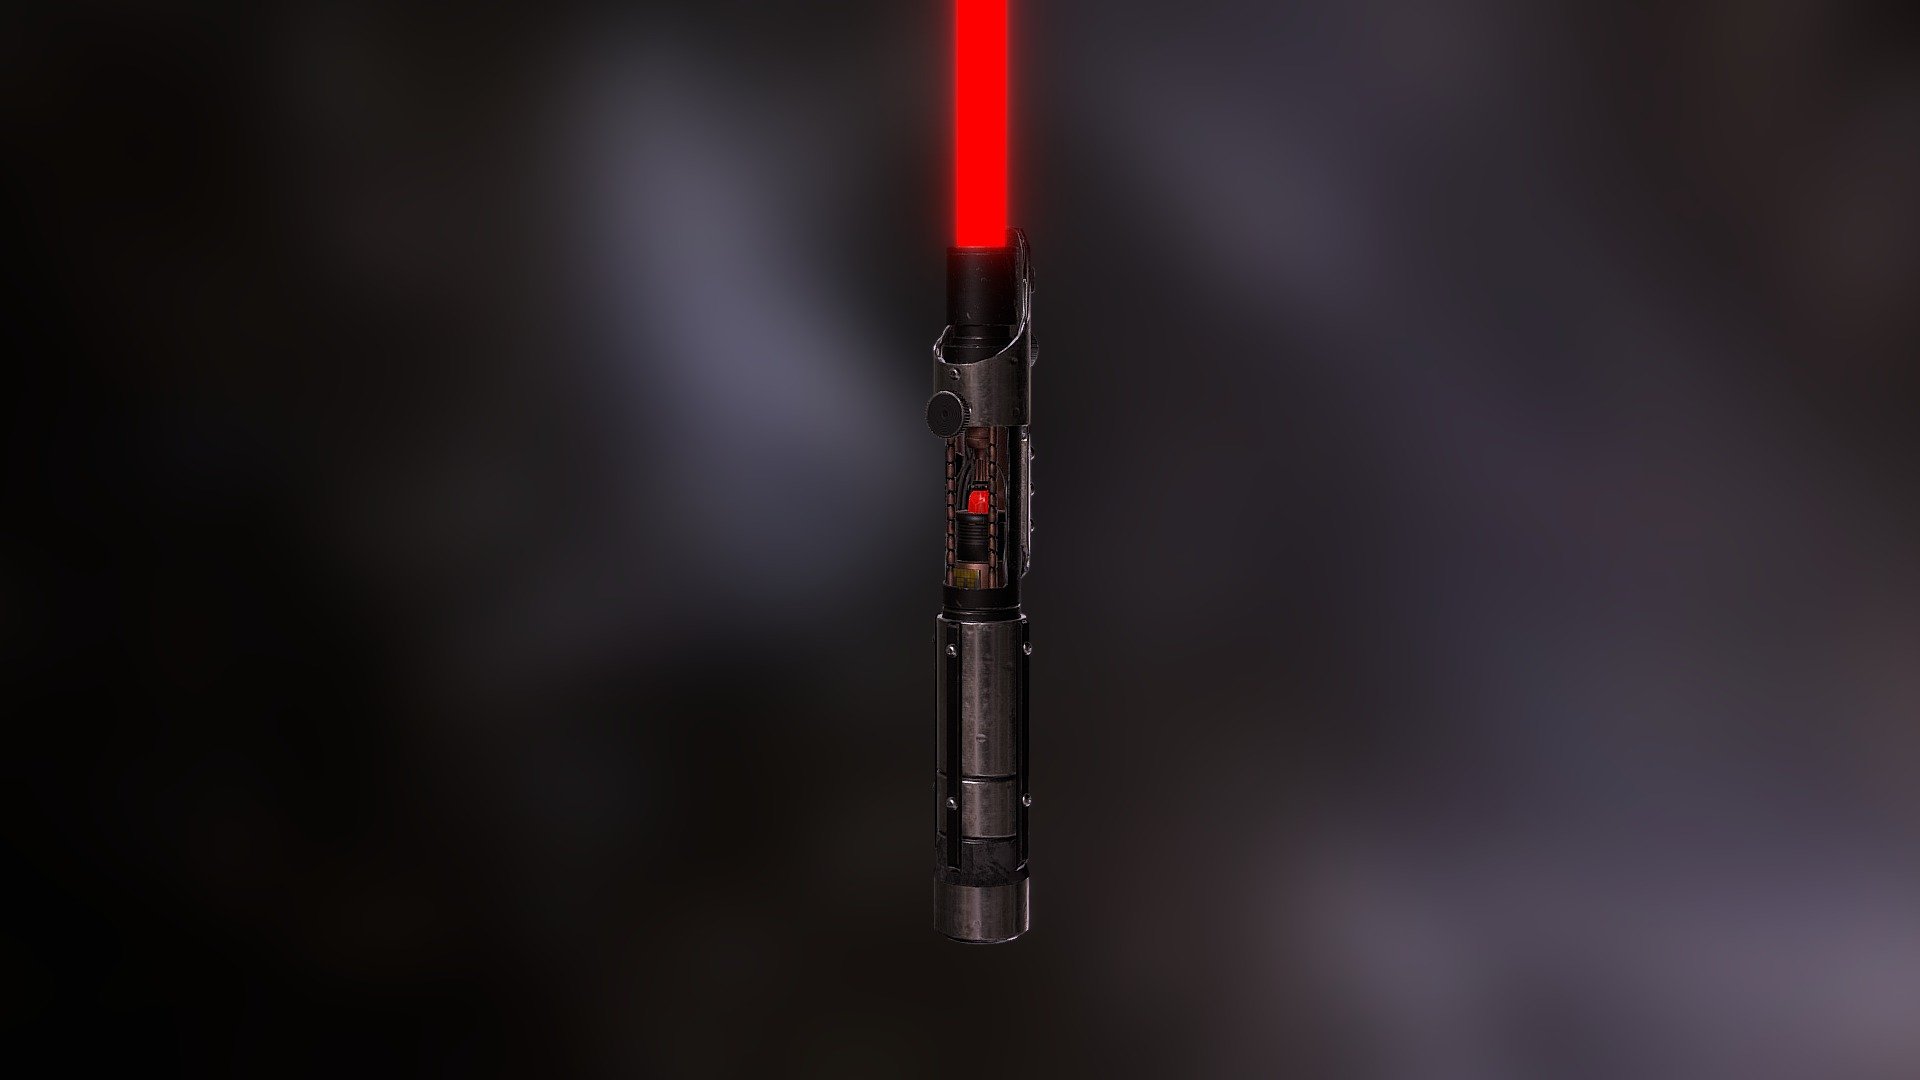 Model created for game engine, this model was made to be very similar to the starkiller's lightsaber 3d model